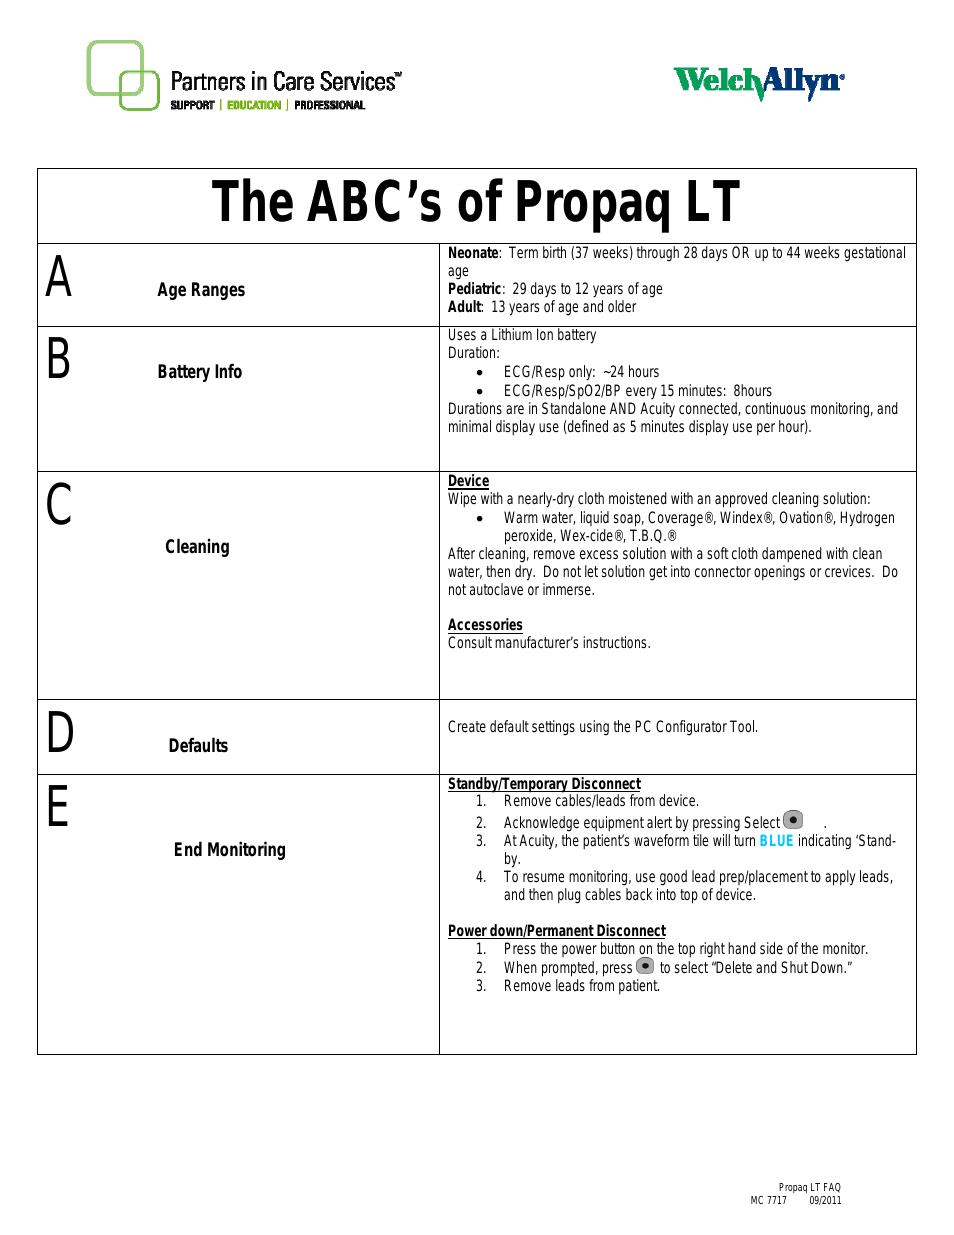 ABCs of Propaq LT - Quick Reference Guide